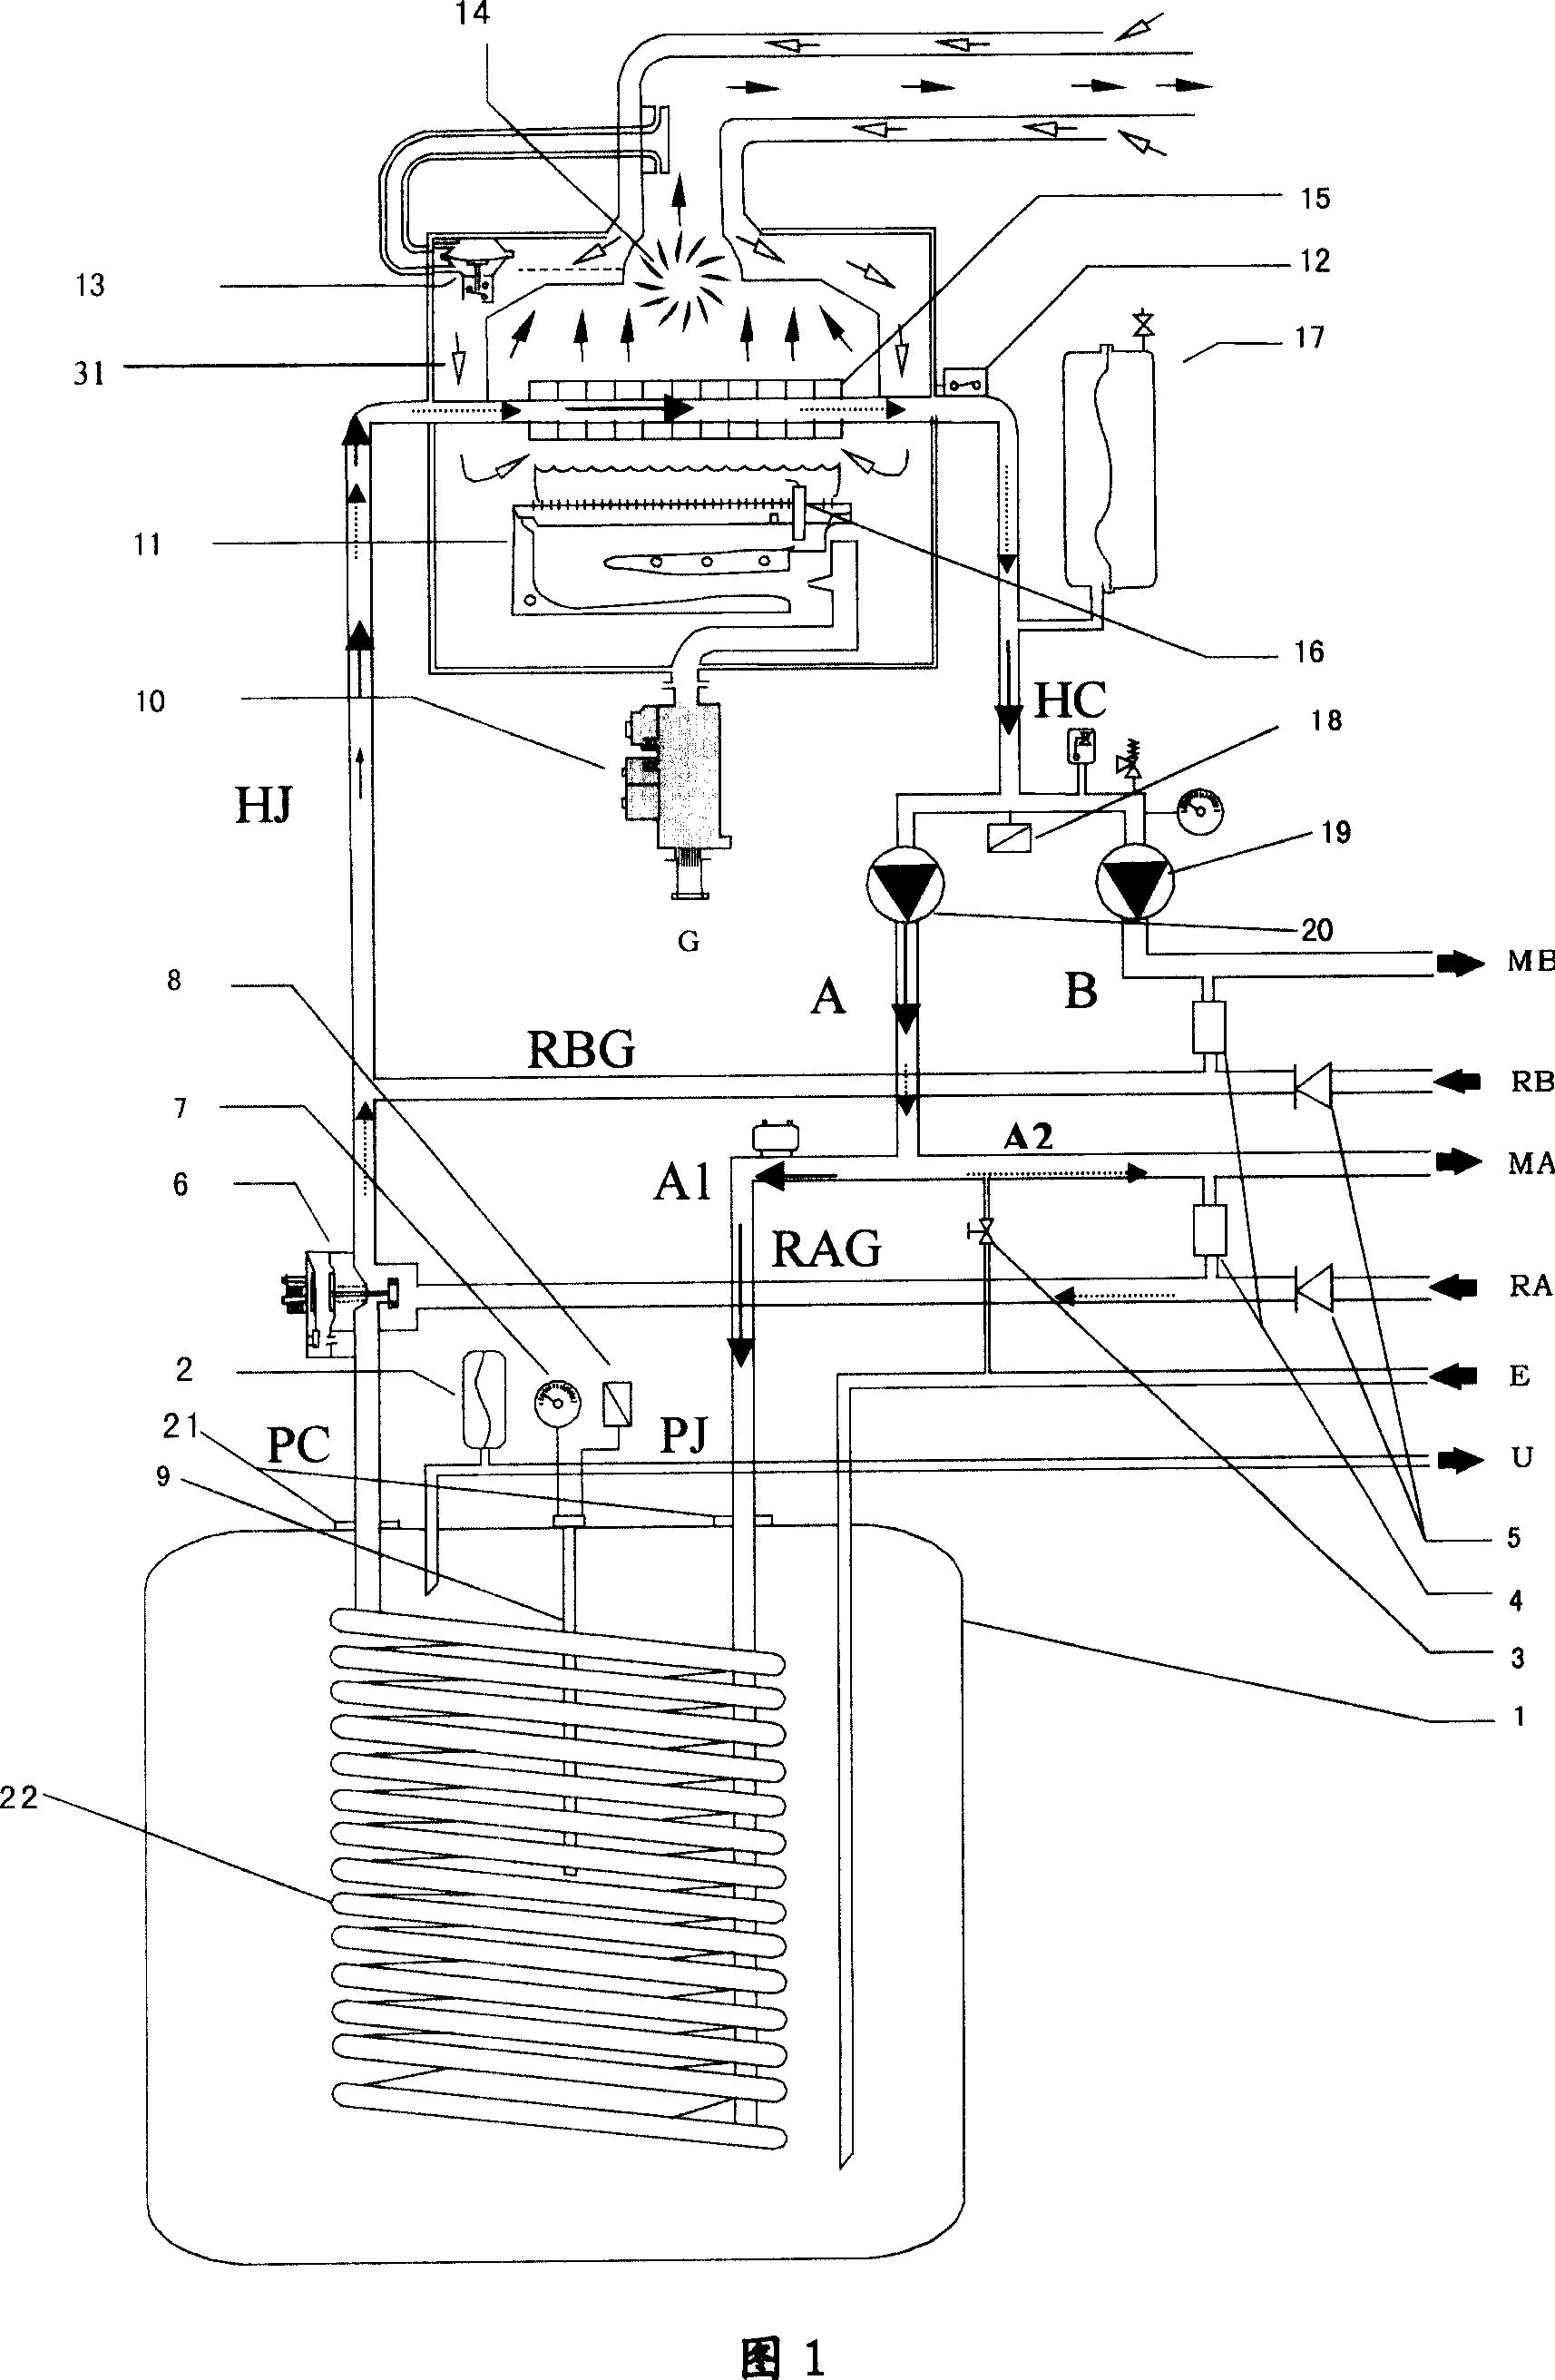 Double-purpose apparatus for warming and heating water